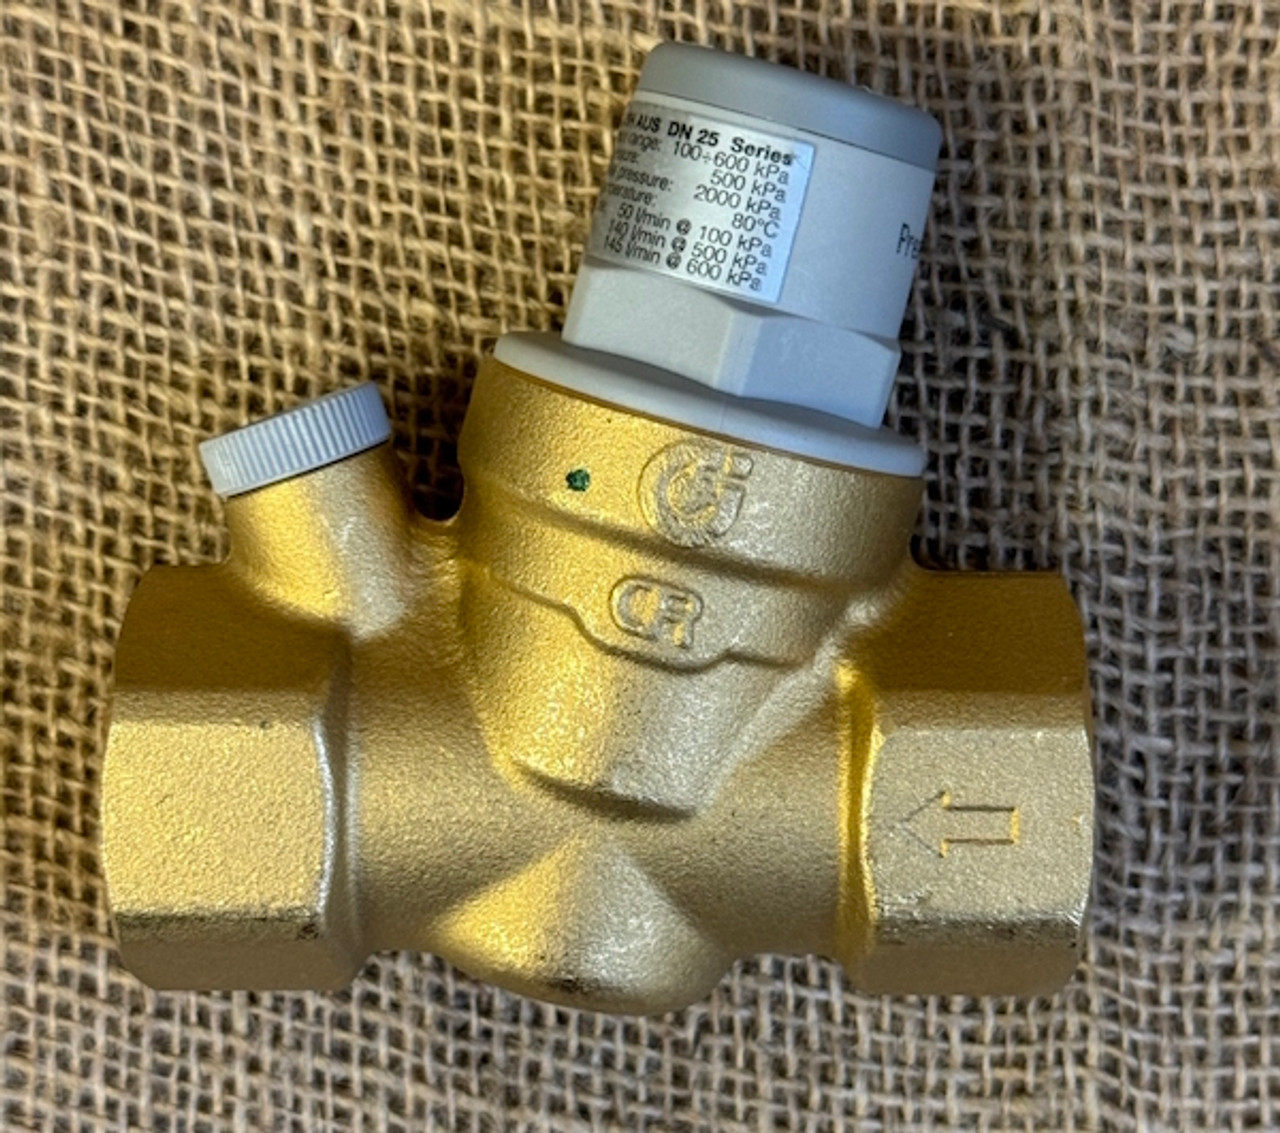 Direct Acting PRV - 20mm Static Flow Reducer "Watermark Approved"